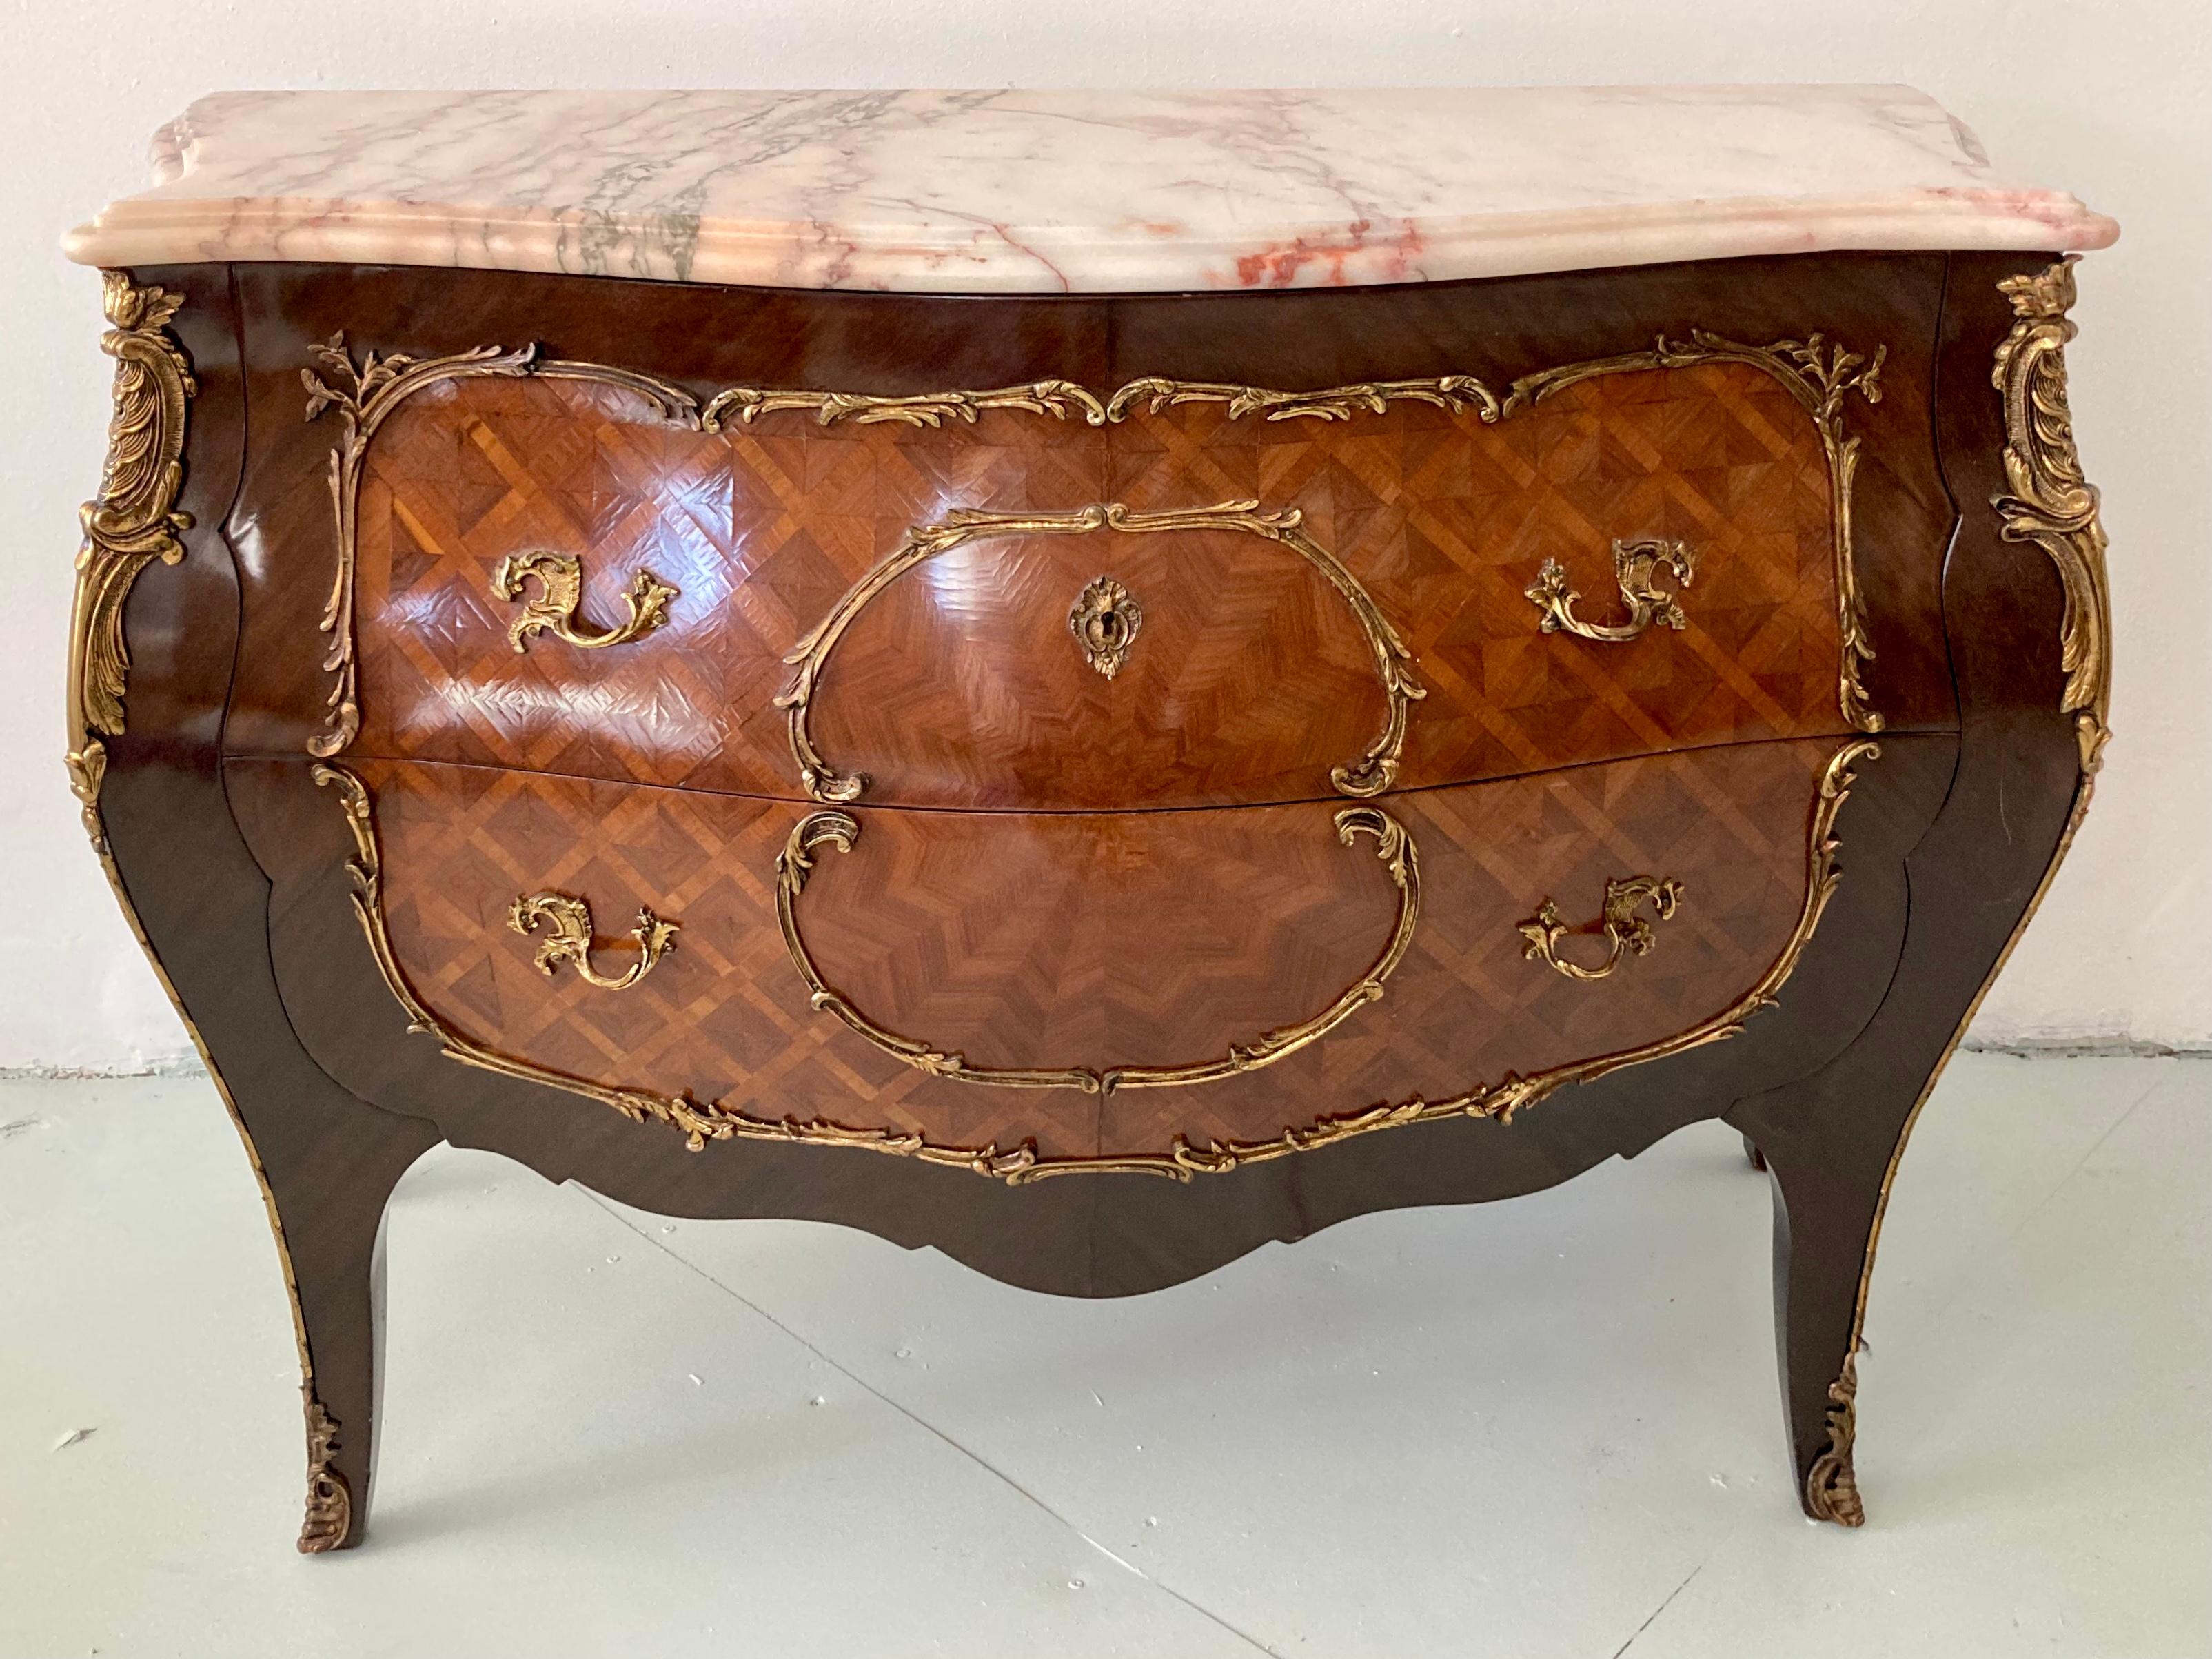 Classic Louis XV style commode with marble top. Great marquetry and ormolu details. Original Marble Top . We have 2 available in inventory. Buy both and have a fabulous pair of oversized nightstands.